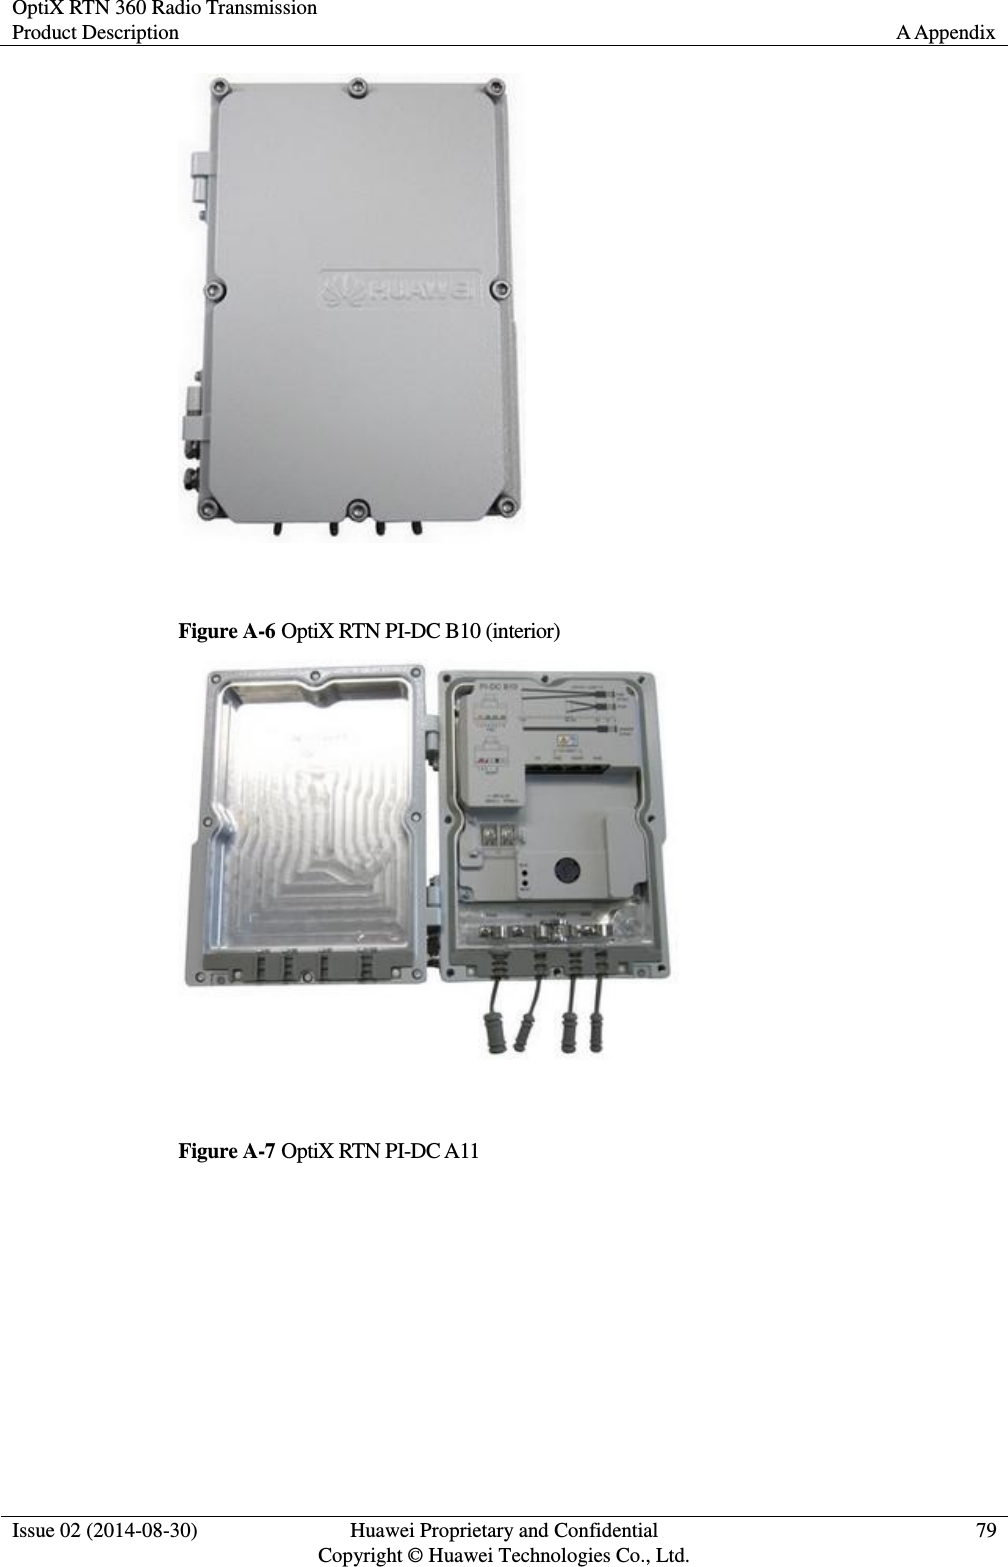 OptiX RTN 360 Radio Transmission Product Description A Appendix  Issue 02 (2014-08-30) Huawei Proprietary and Confidential                                     Copyright © Huawei Technologies Co., Ltd. 79    Figure A-6 OptiX RTN PI-DC B10 (interior)   Figure A-7 OptiX RTN PI-DC A11 